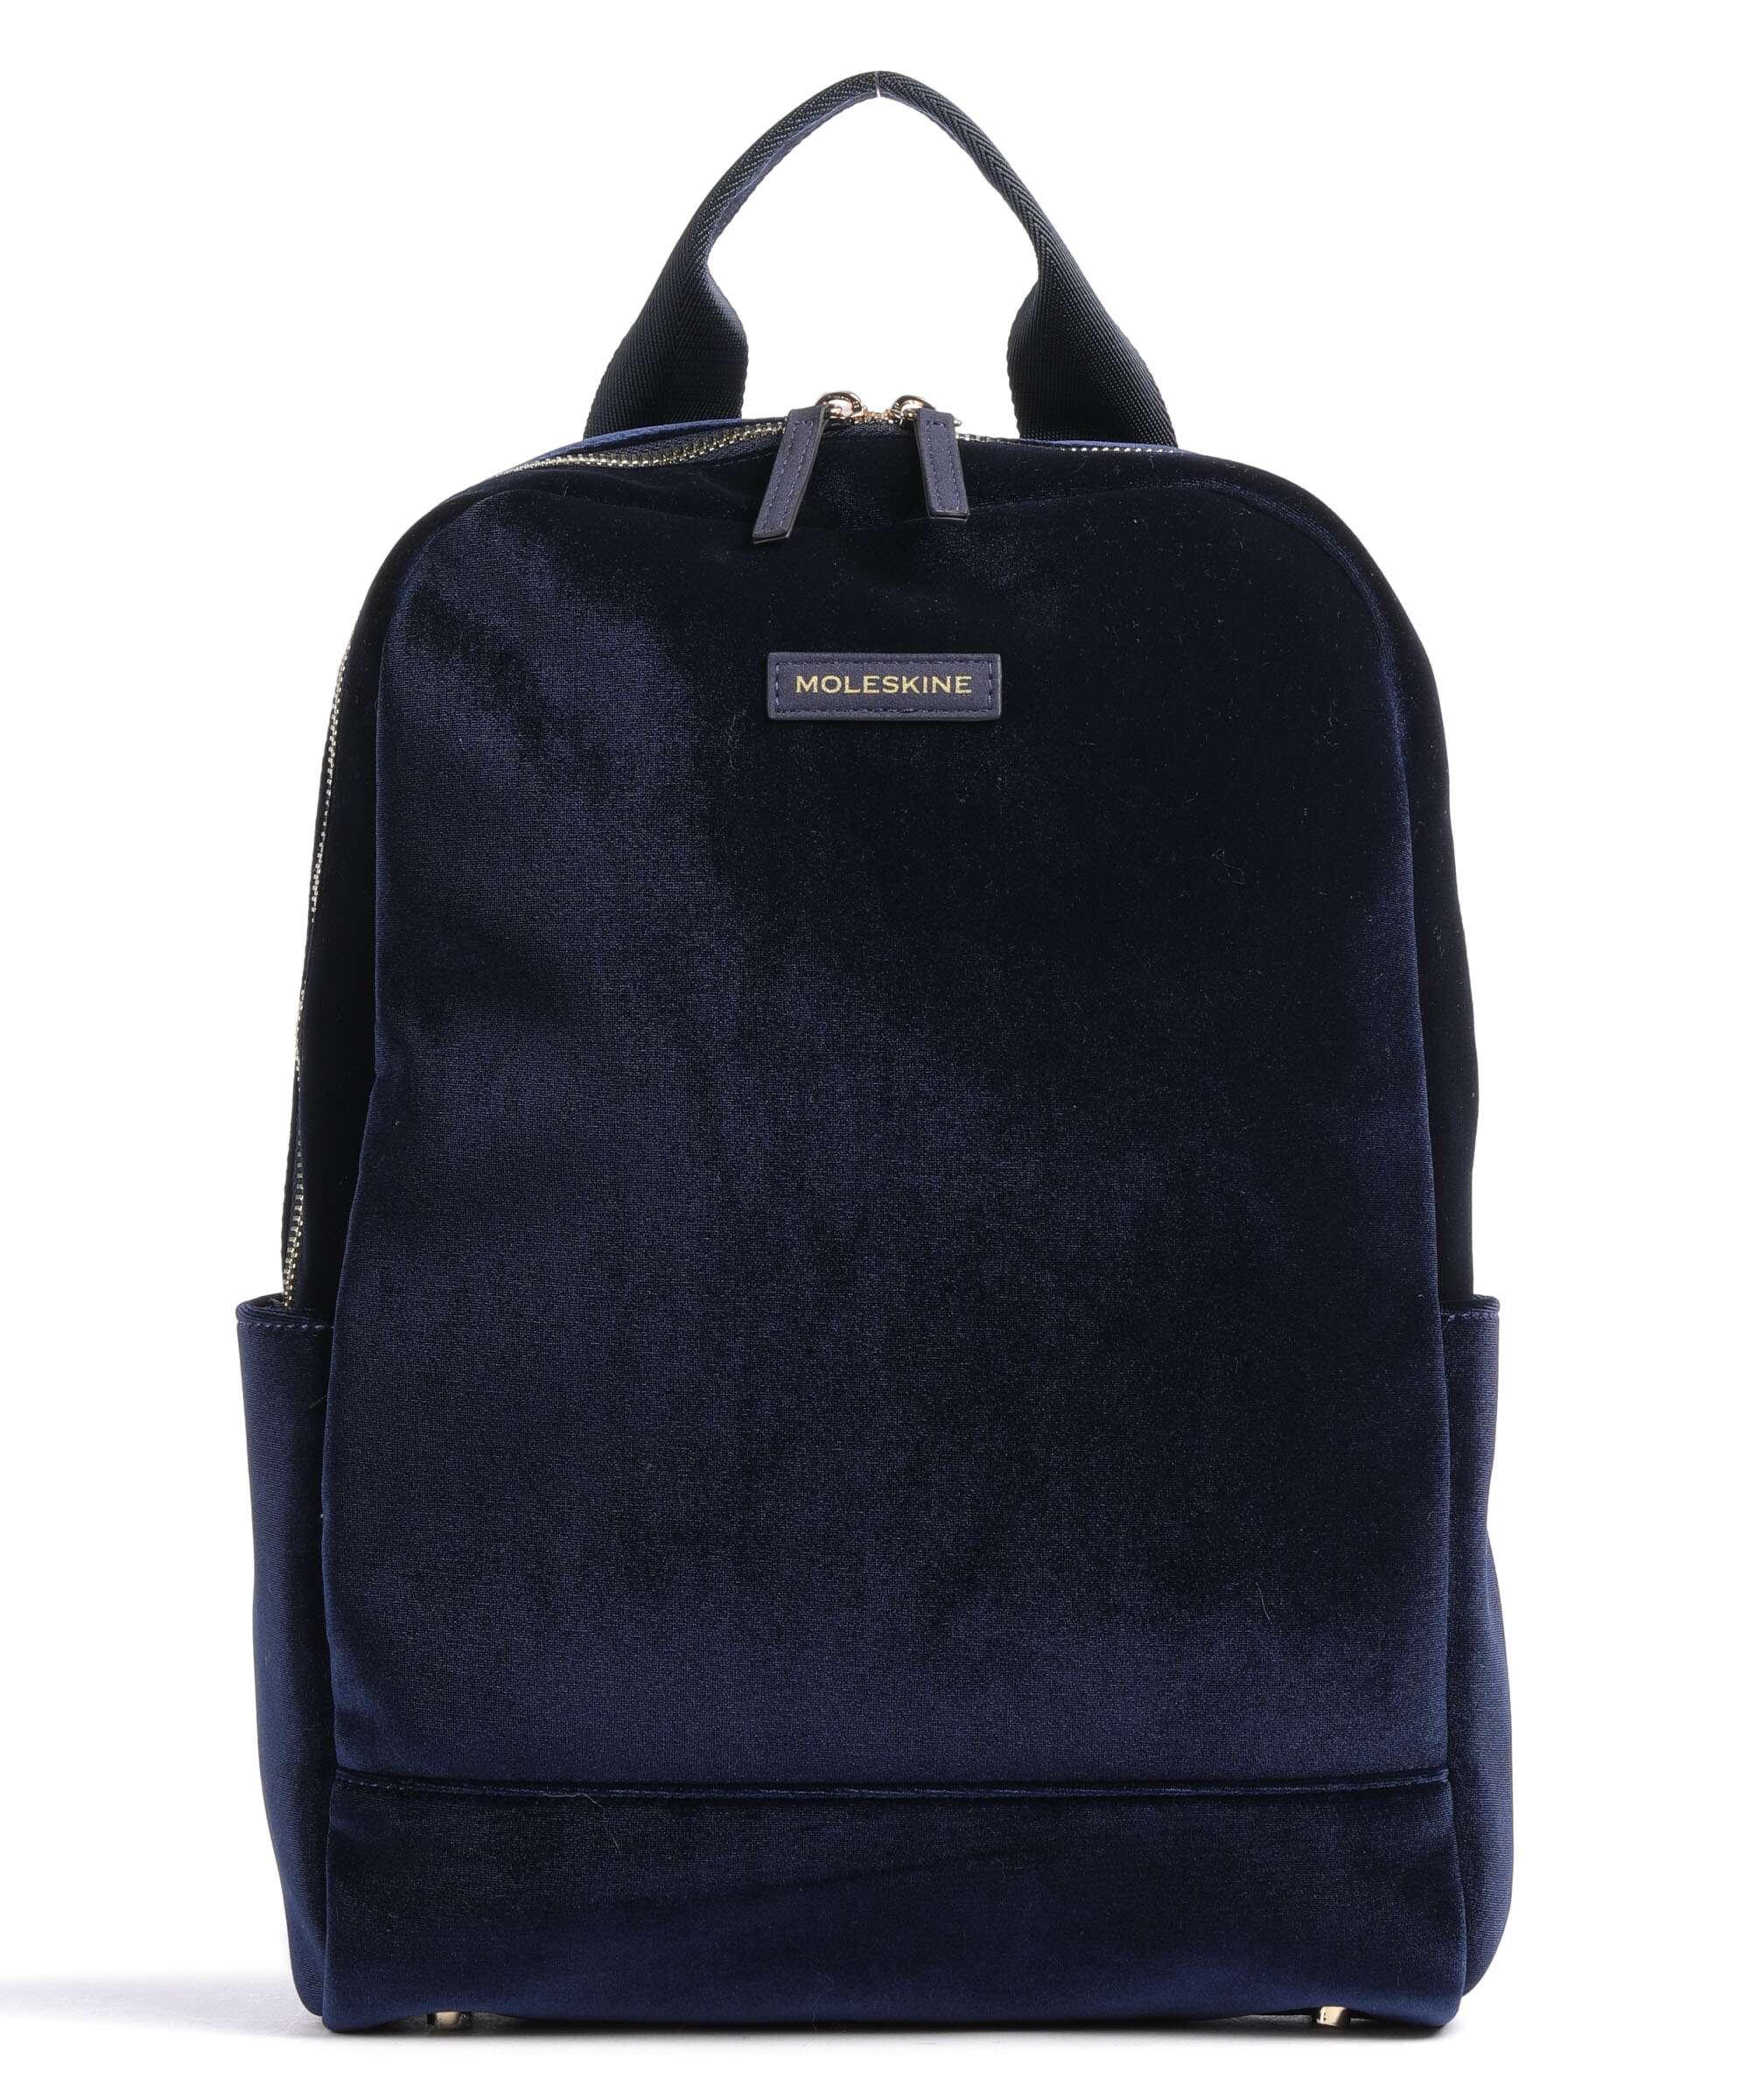 Device Bag | Backpack | Duffelbags.com